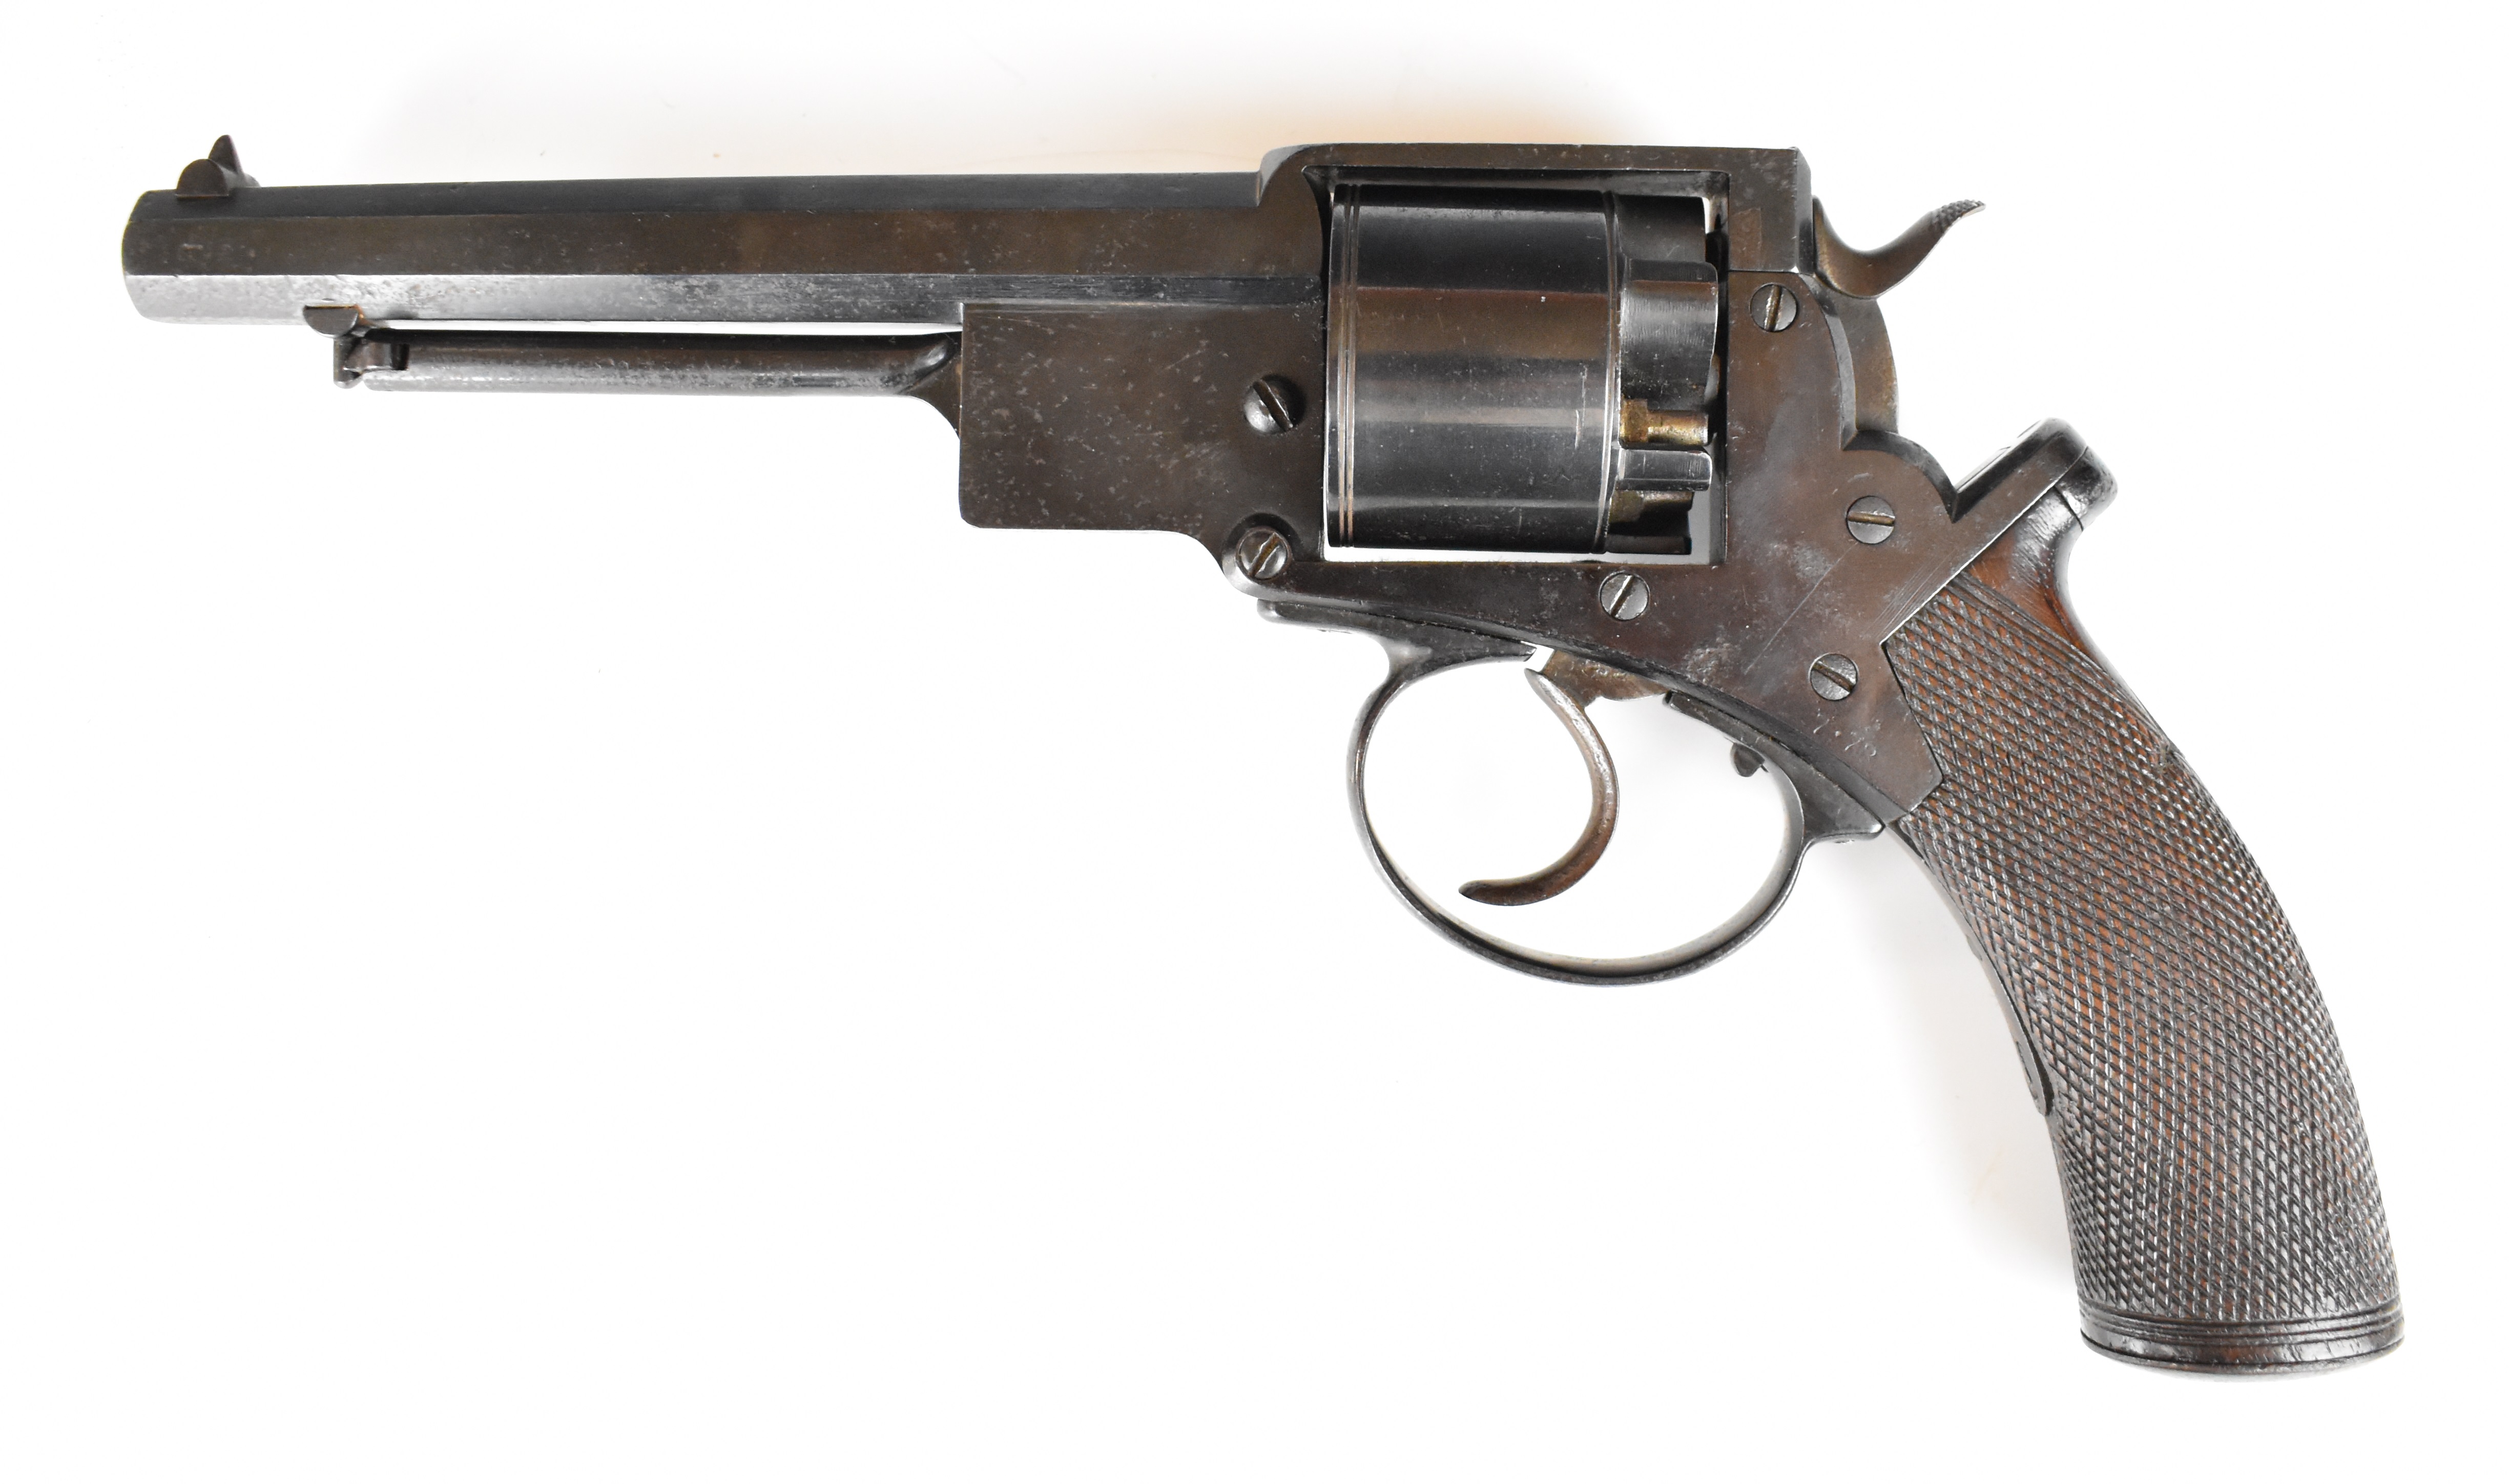 Adam's Patent 50 bore six-shot double-action revolver with chequered grip, line engraved cylinder, - Image 2 of 30